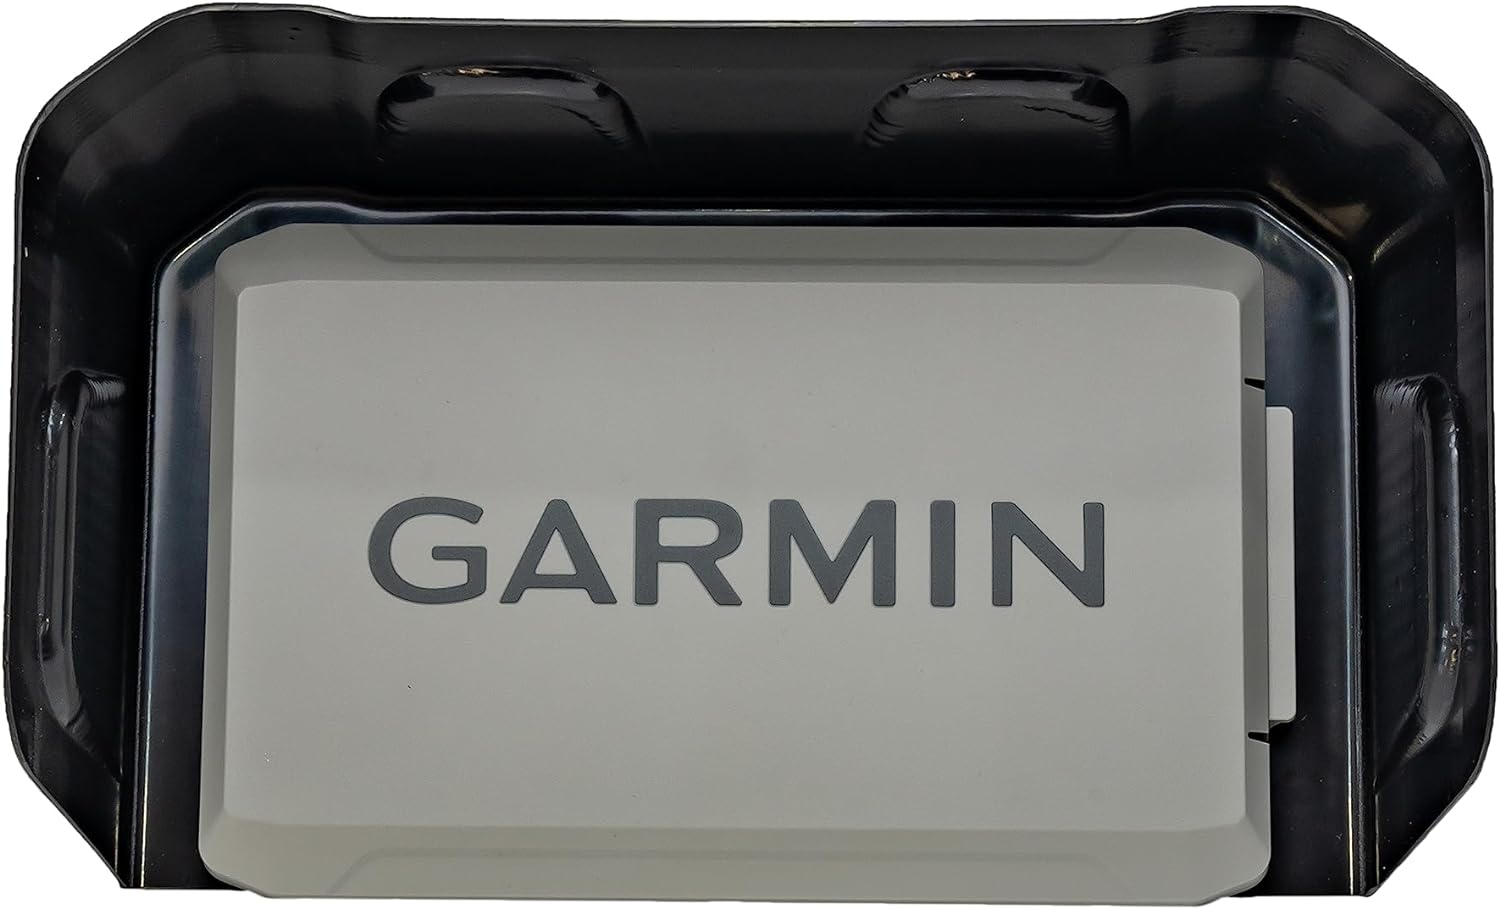 Berleypro Visor Compatible With Garmin Gps, Fish Finders And Depth Finders. Designed As An Anti-Glare Sun Shande And Screen Protector For The Garmin Striker, Garmin Echomap, Garmin Echomap Ultra, Garmin Echomap Uhd, Garmin Gpsmap, Garmin Echomap Uhd2 , And More.